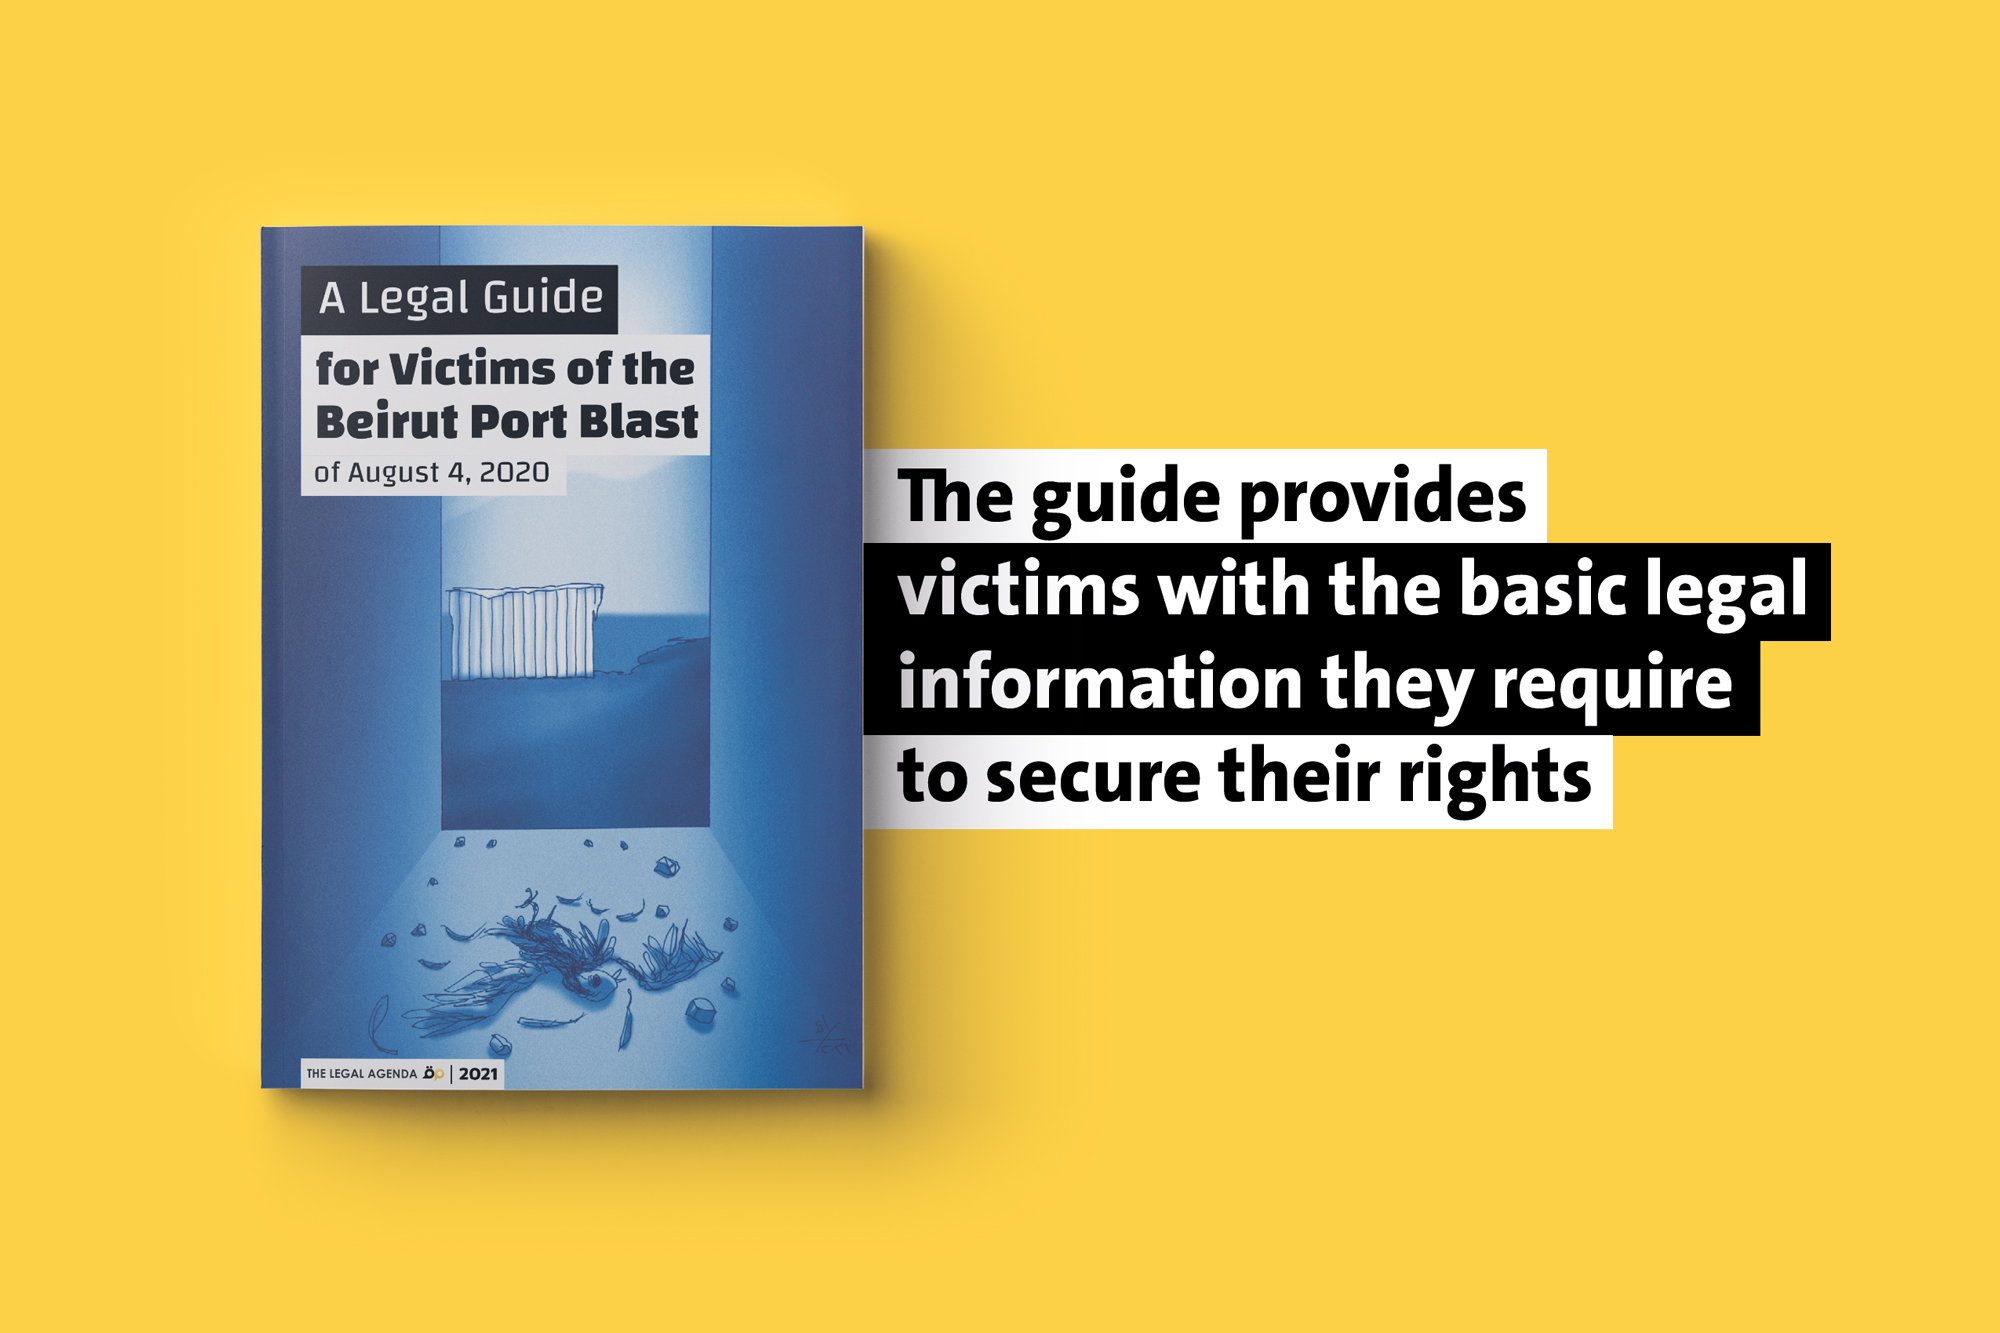 A Legal Guide for Victims of the Beirut Port Blast